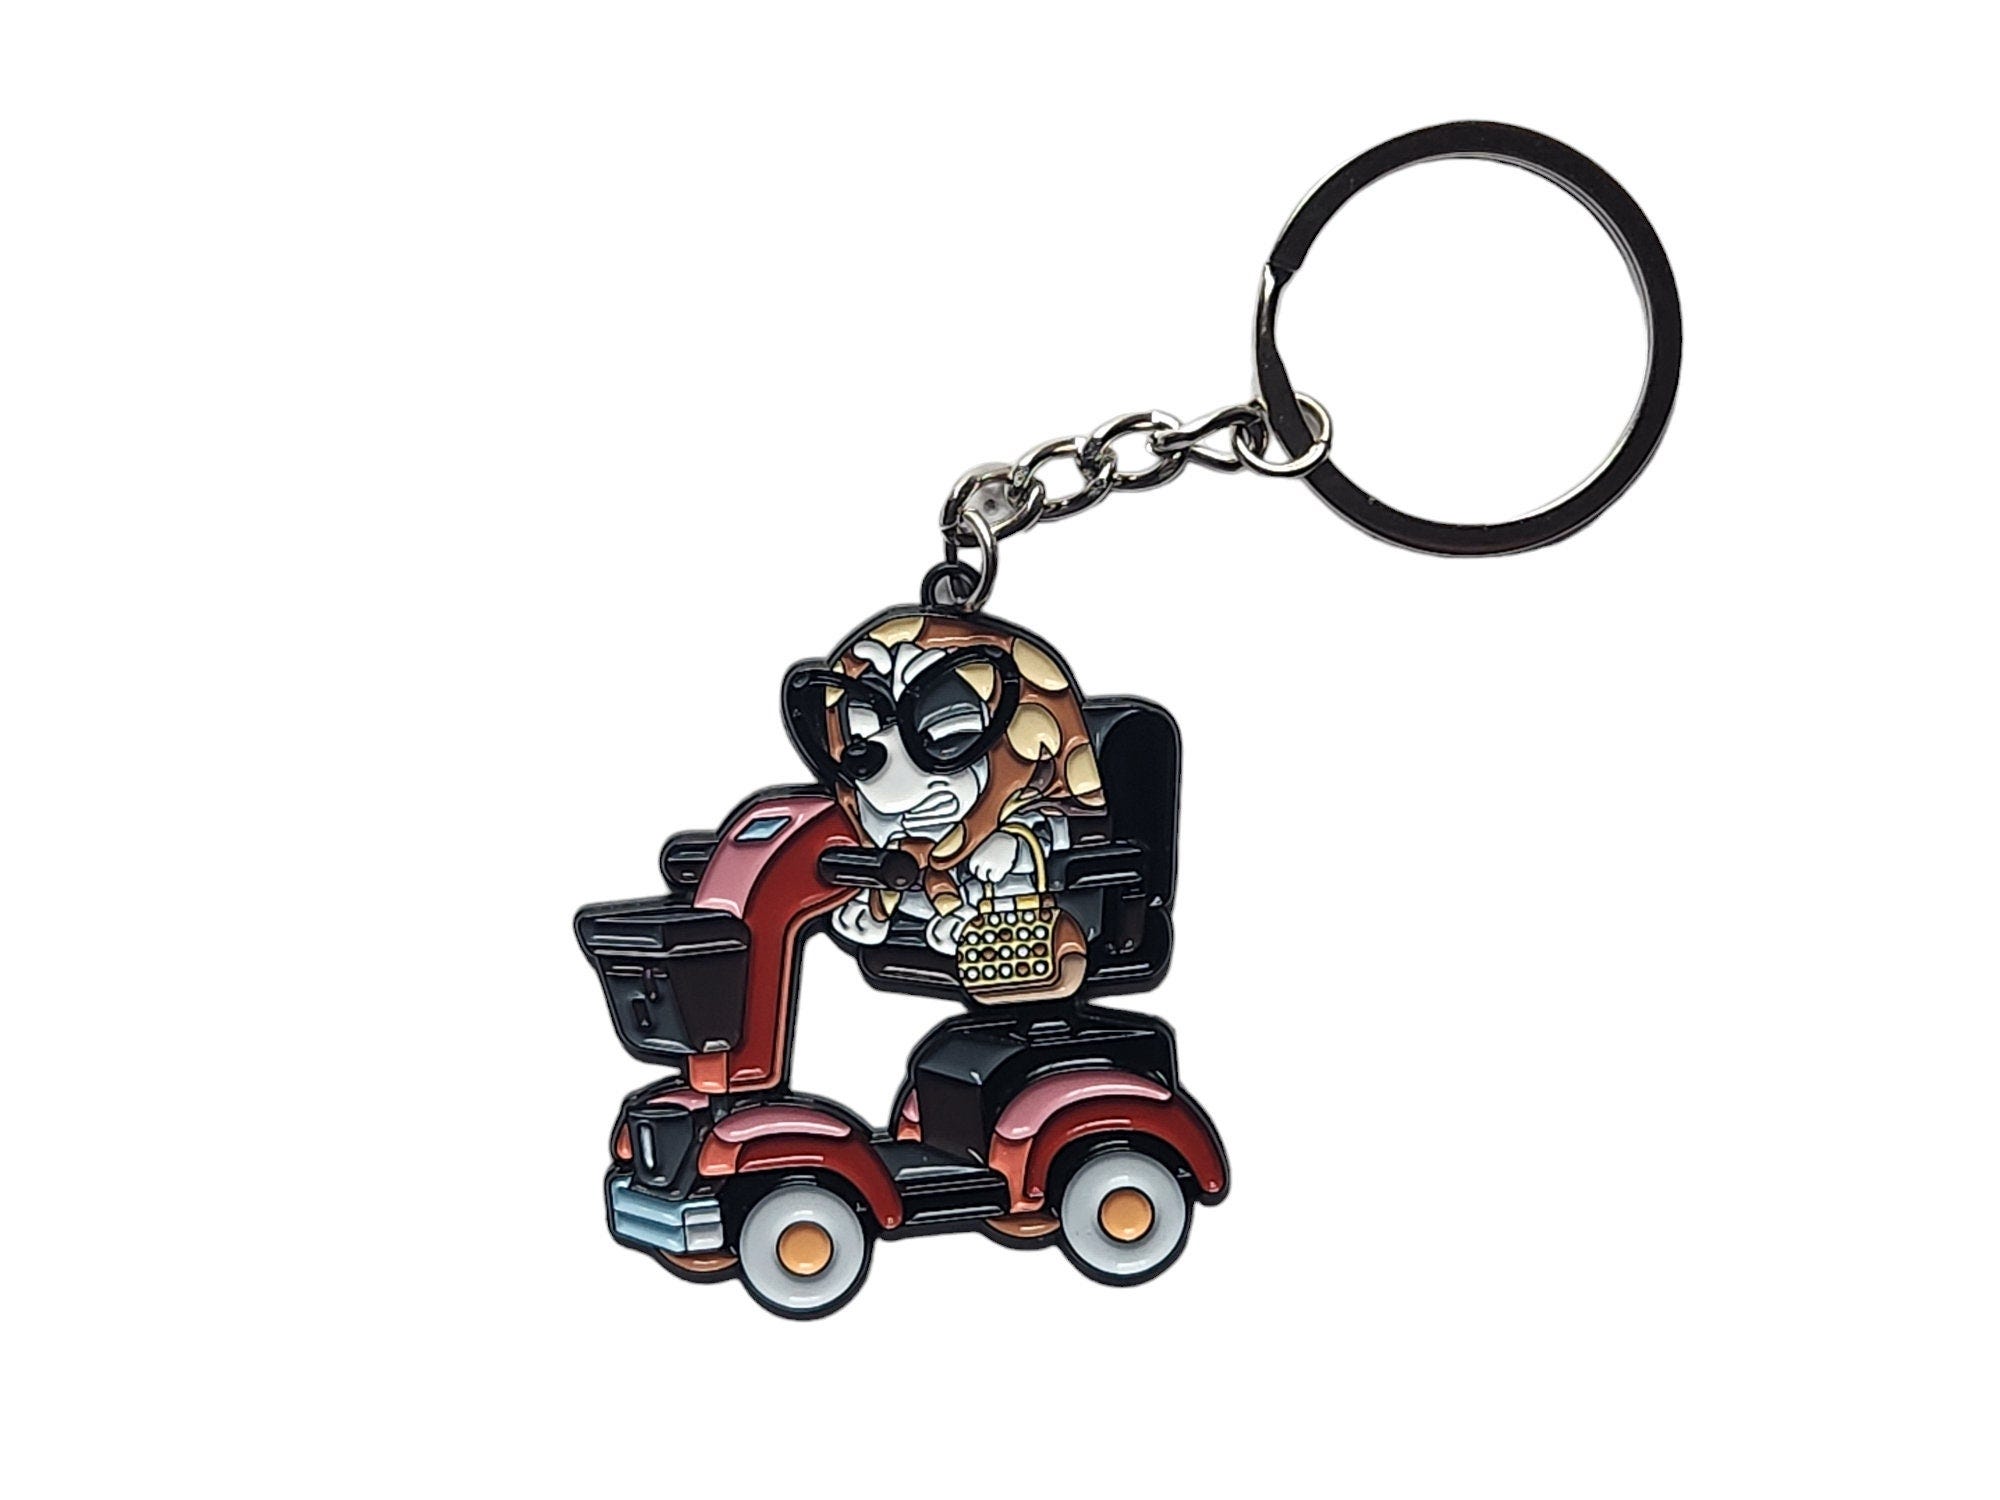 Blue Dog Muffin Granny-Mobile Inspired Keychain